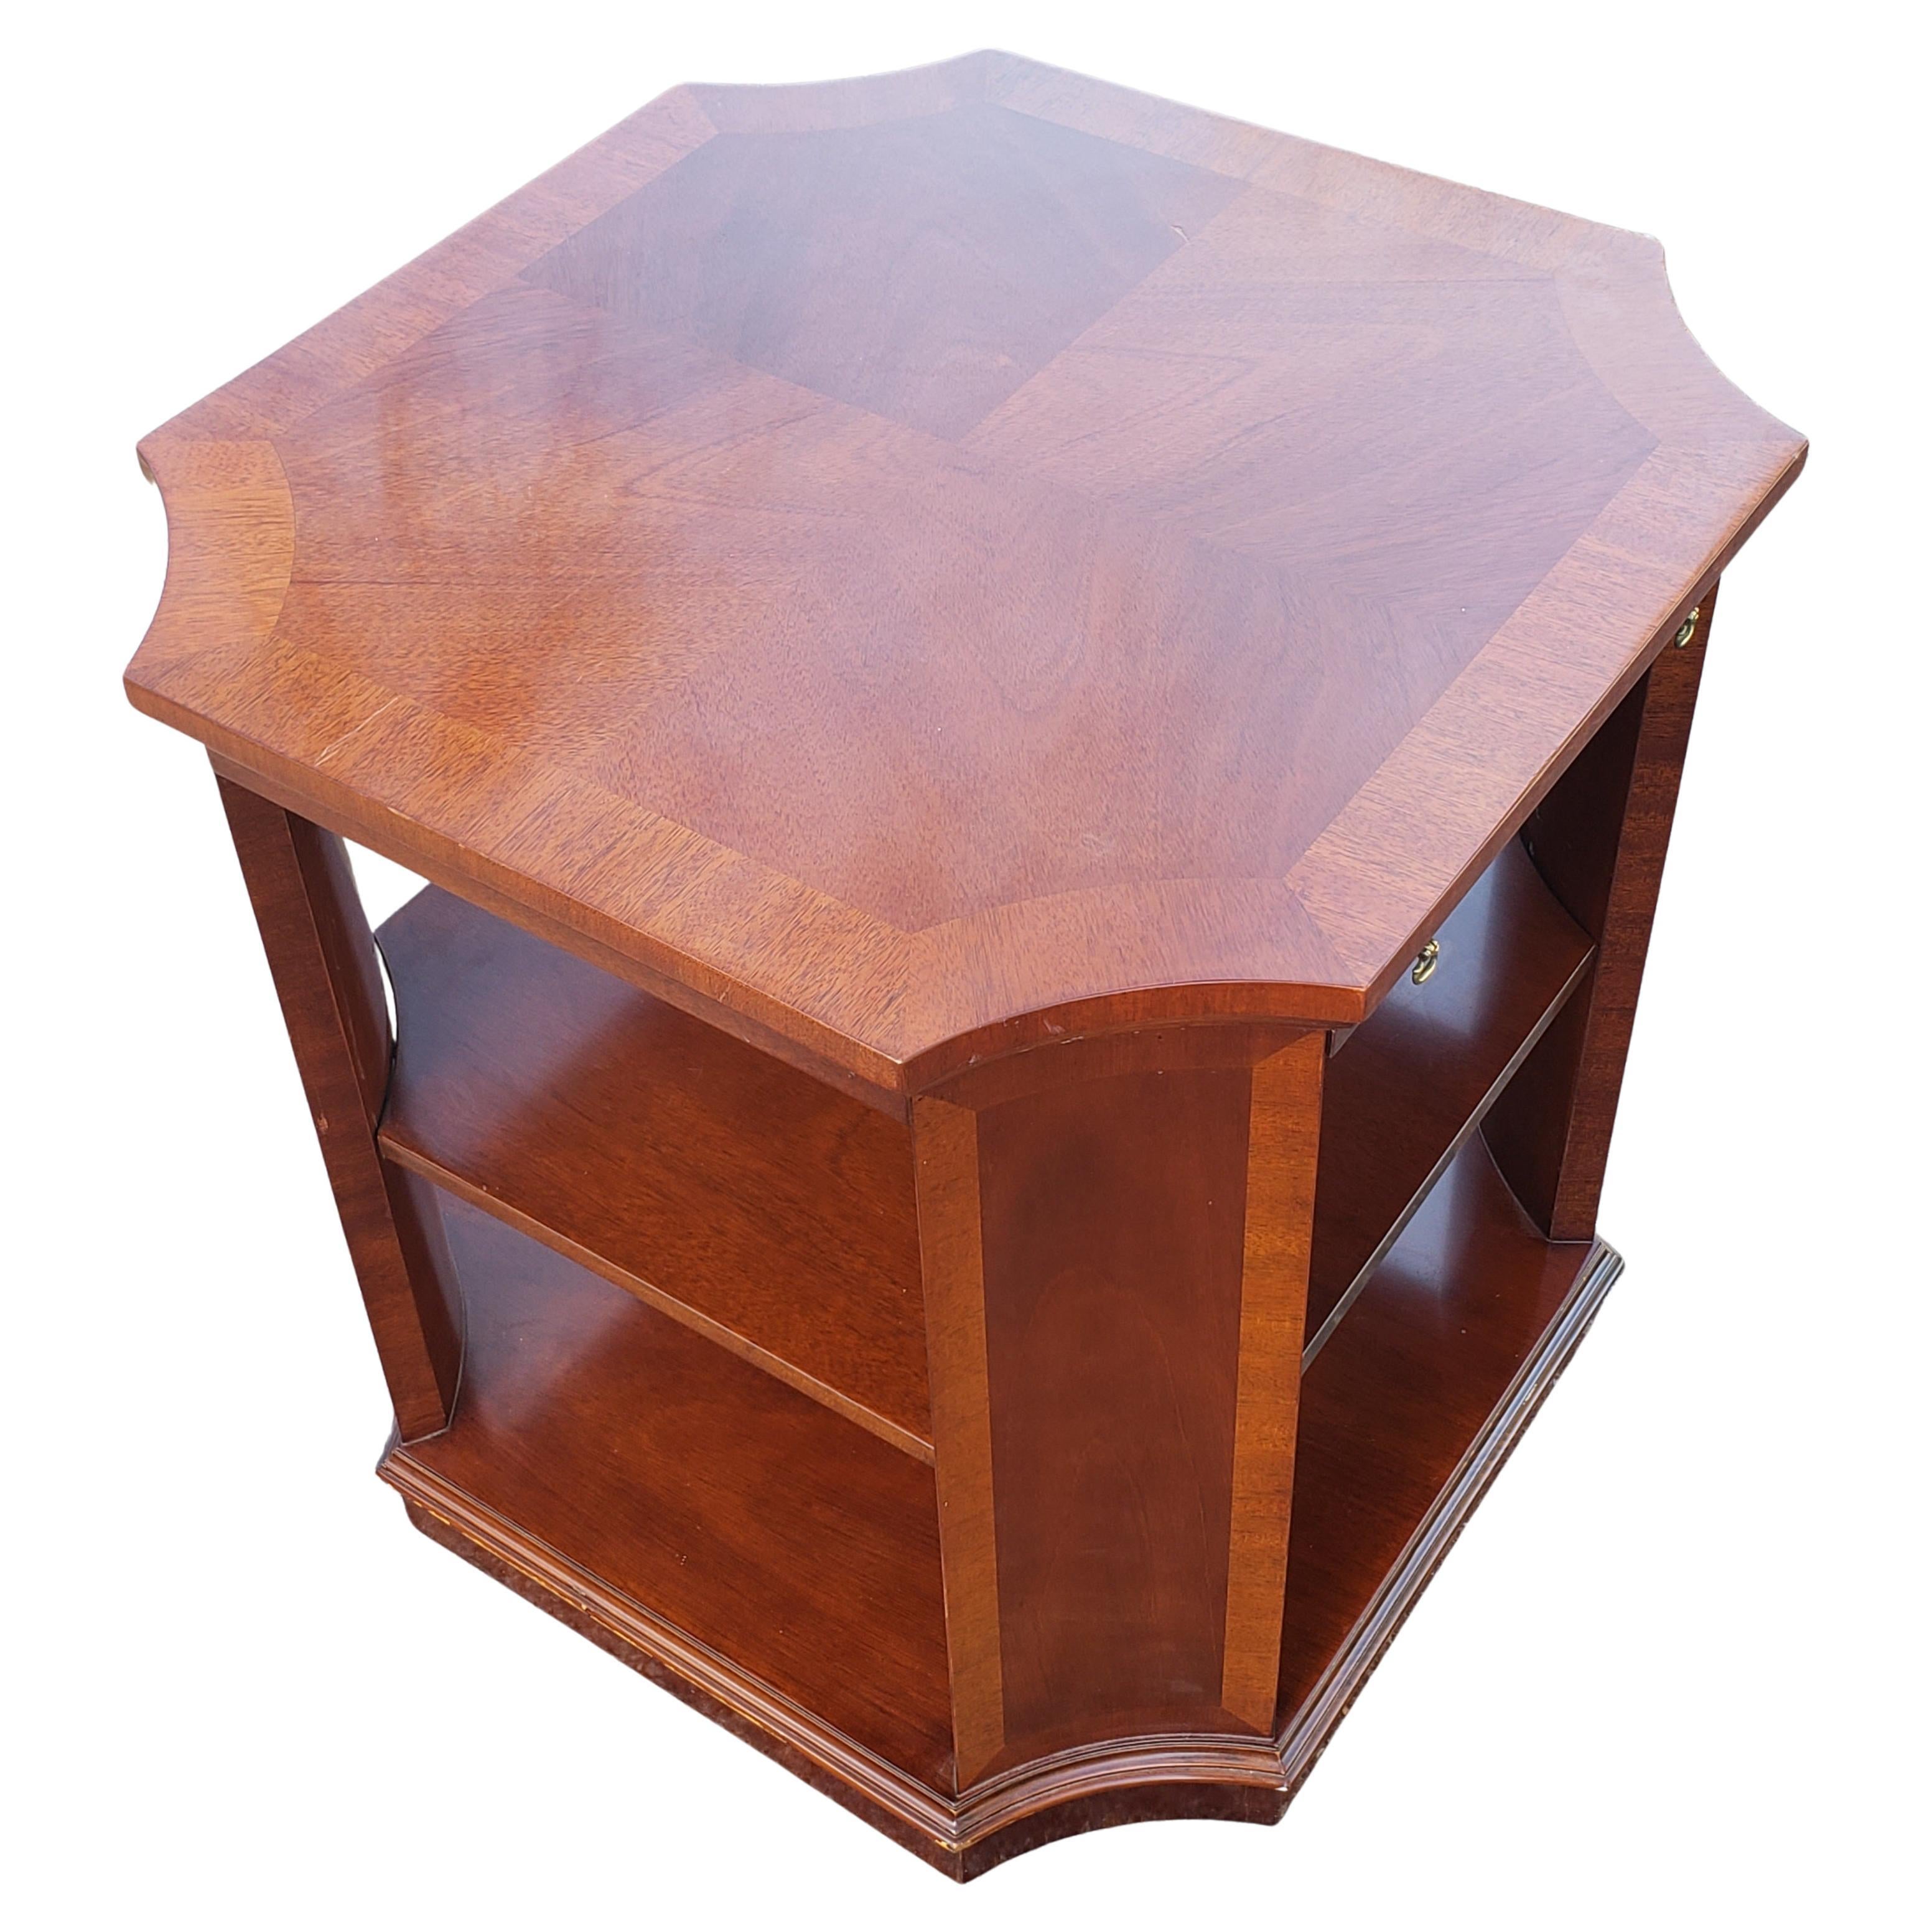 Vintage end table or occasional table in solid mahogany, with both an adjustable shelf and a pullout tray, from Kindel Furniture Winterthur Collection. May be used in office setting as library end table or as a server table in the dining room